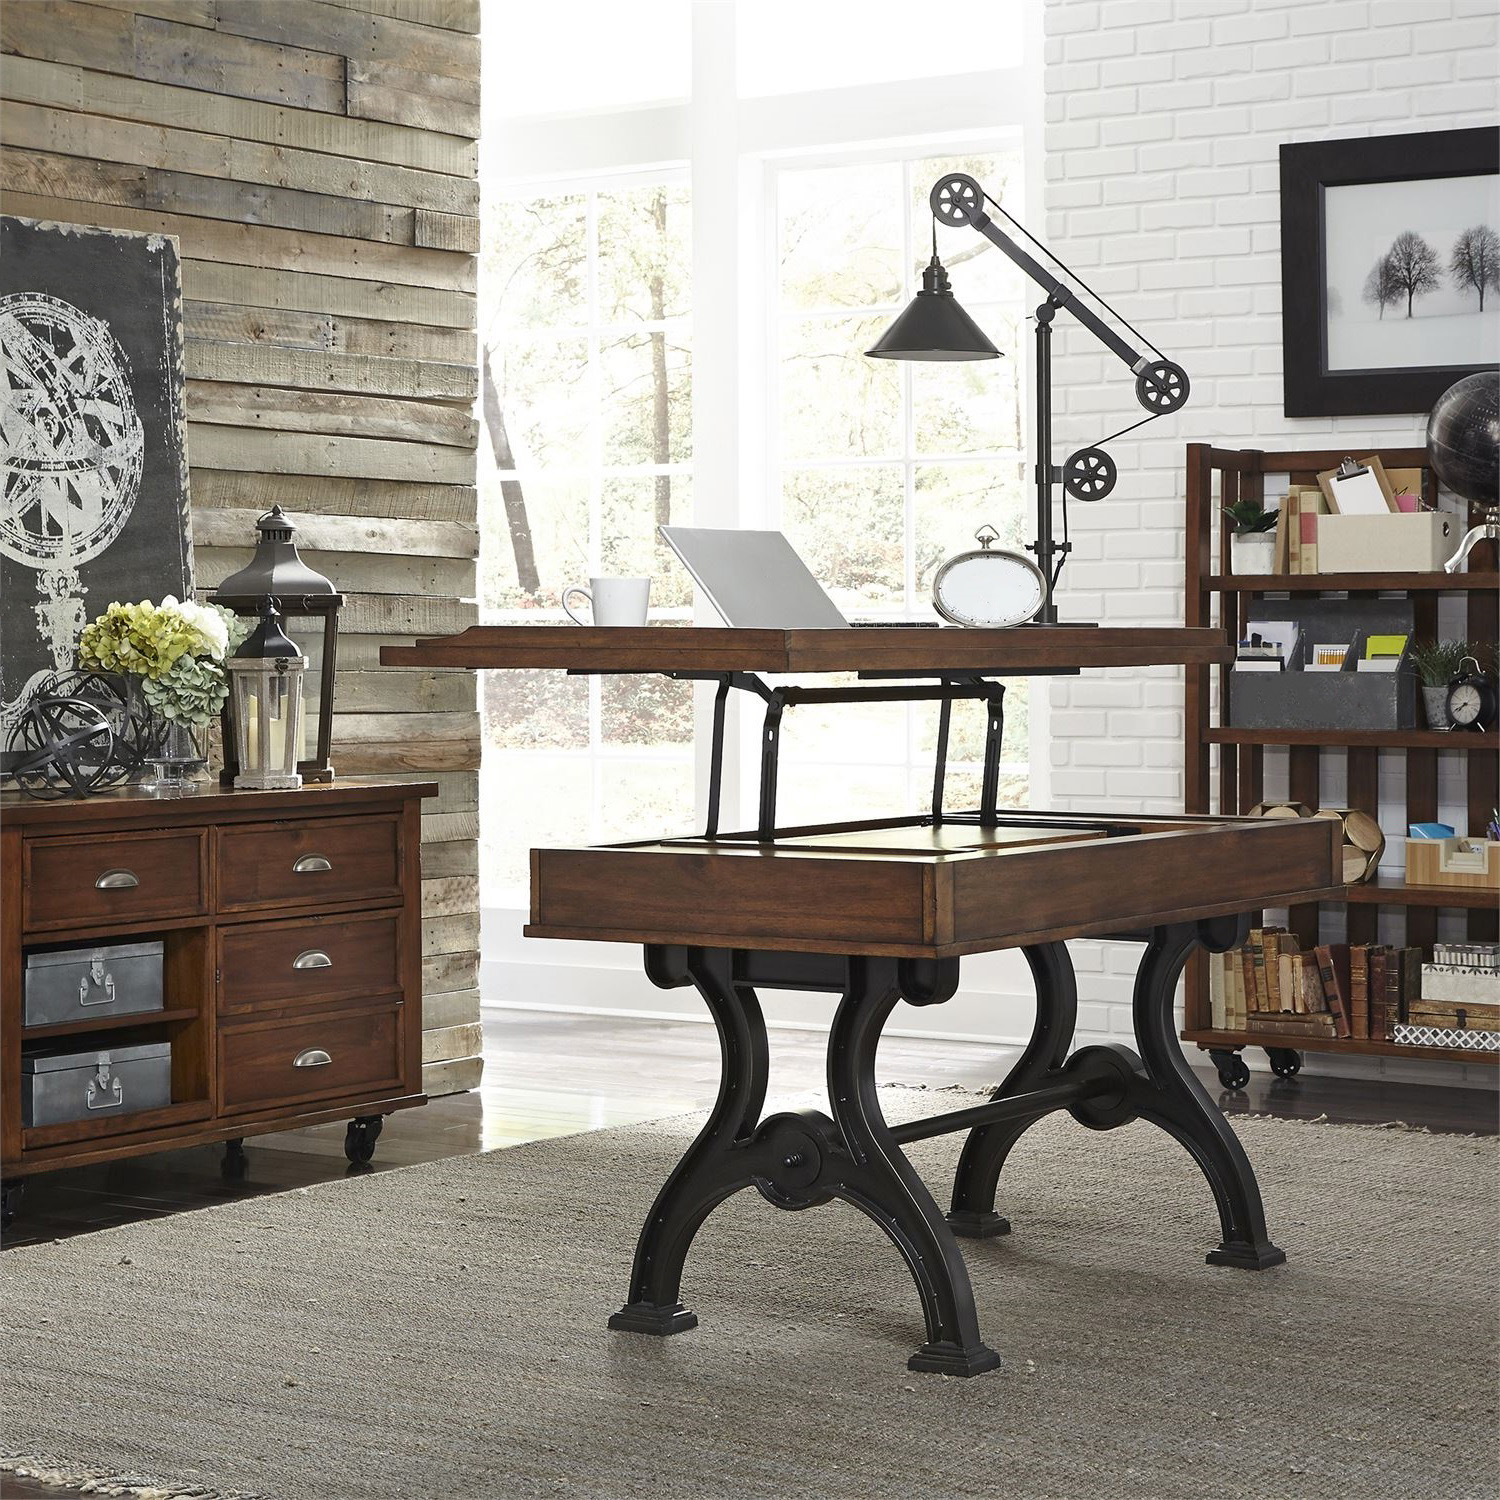 American design furniture by Monroe Tredegar Home Office Collection